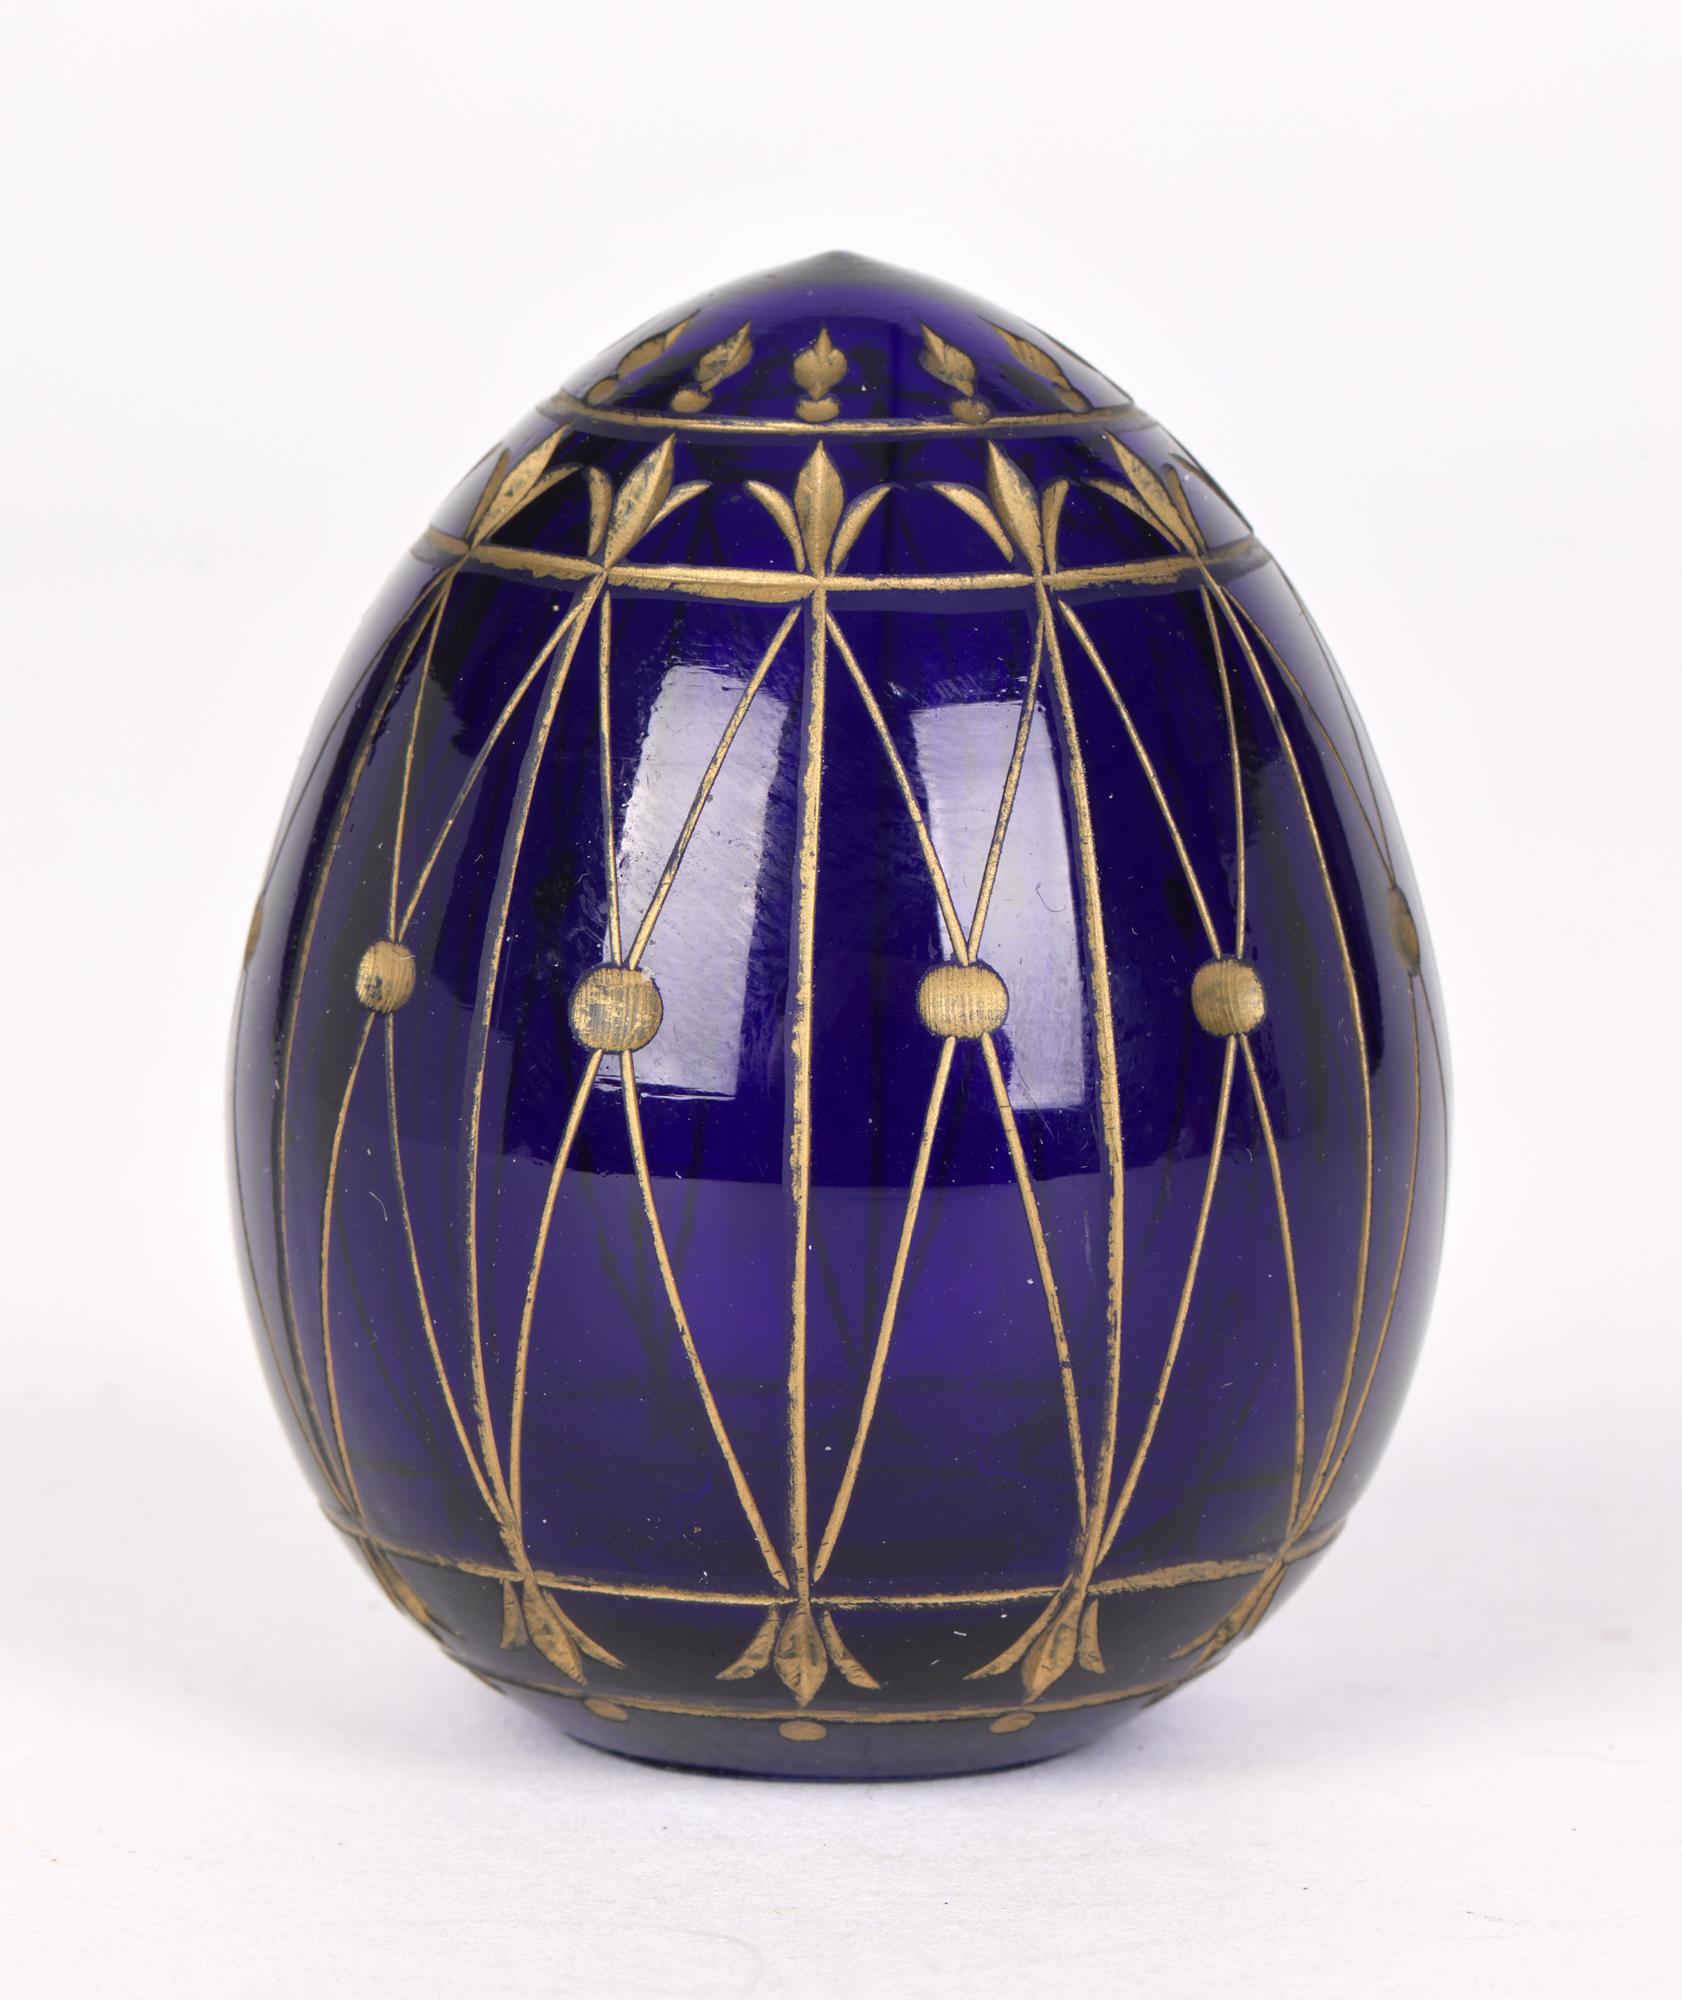 Russian Blue Glass Egg with Engraved Designs Faberge Label 6